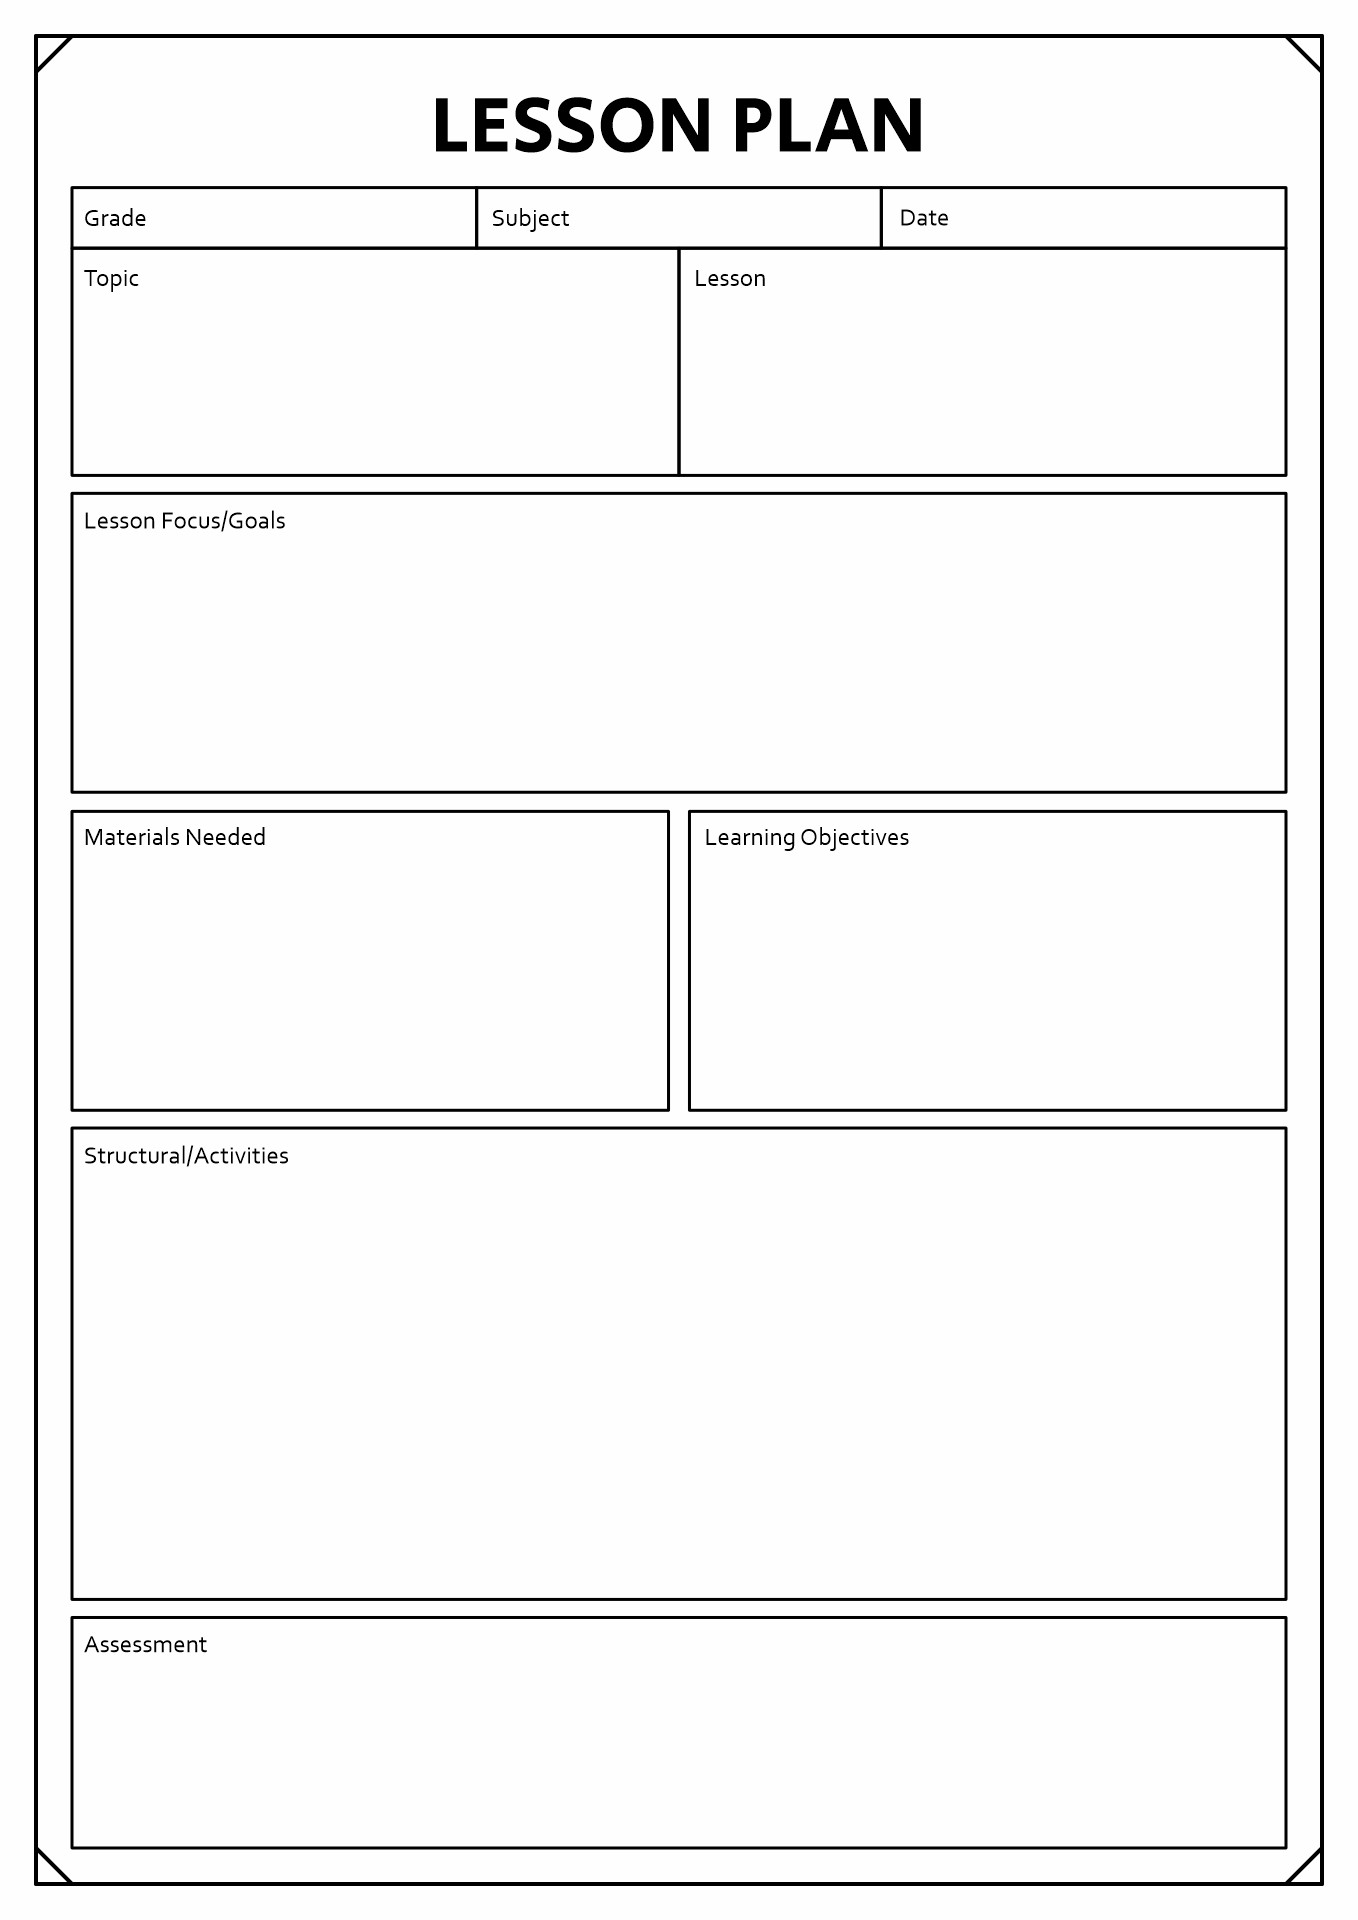 Lesson Plan Format Template